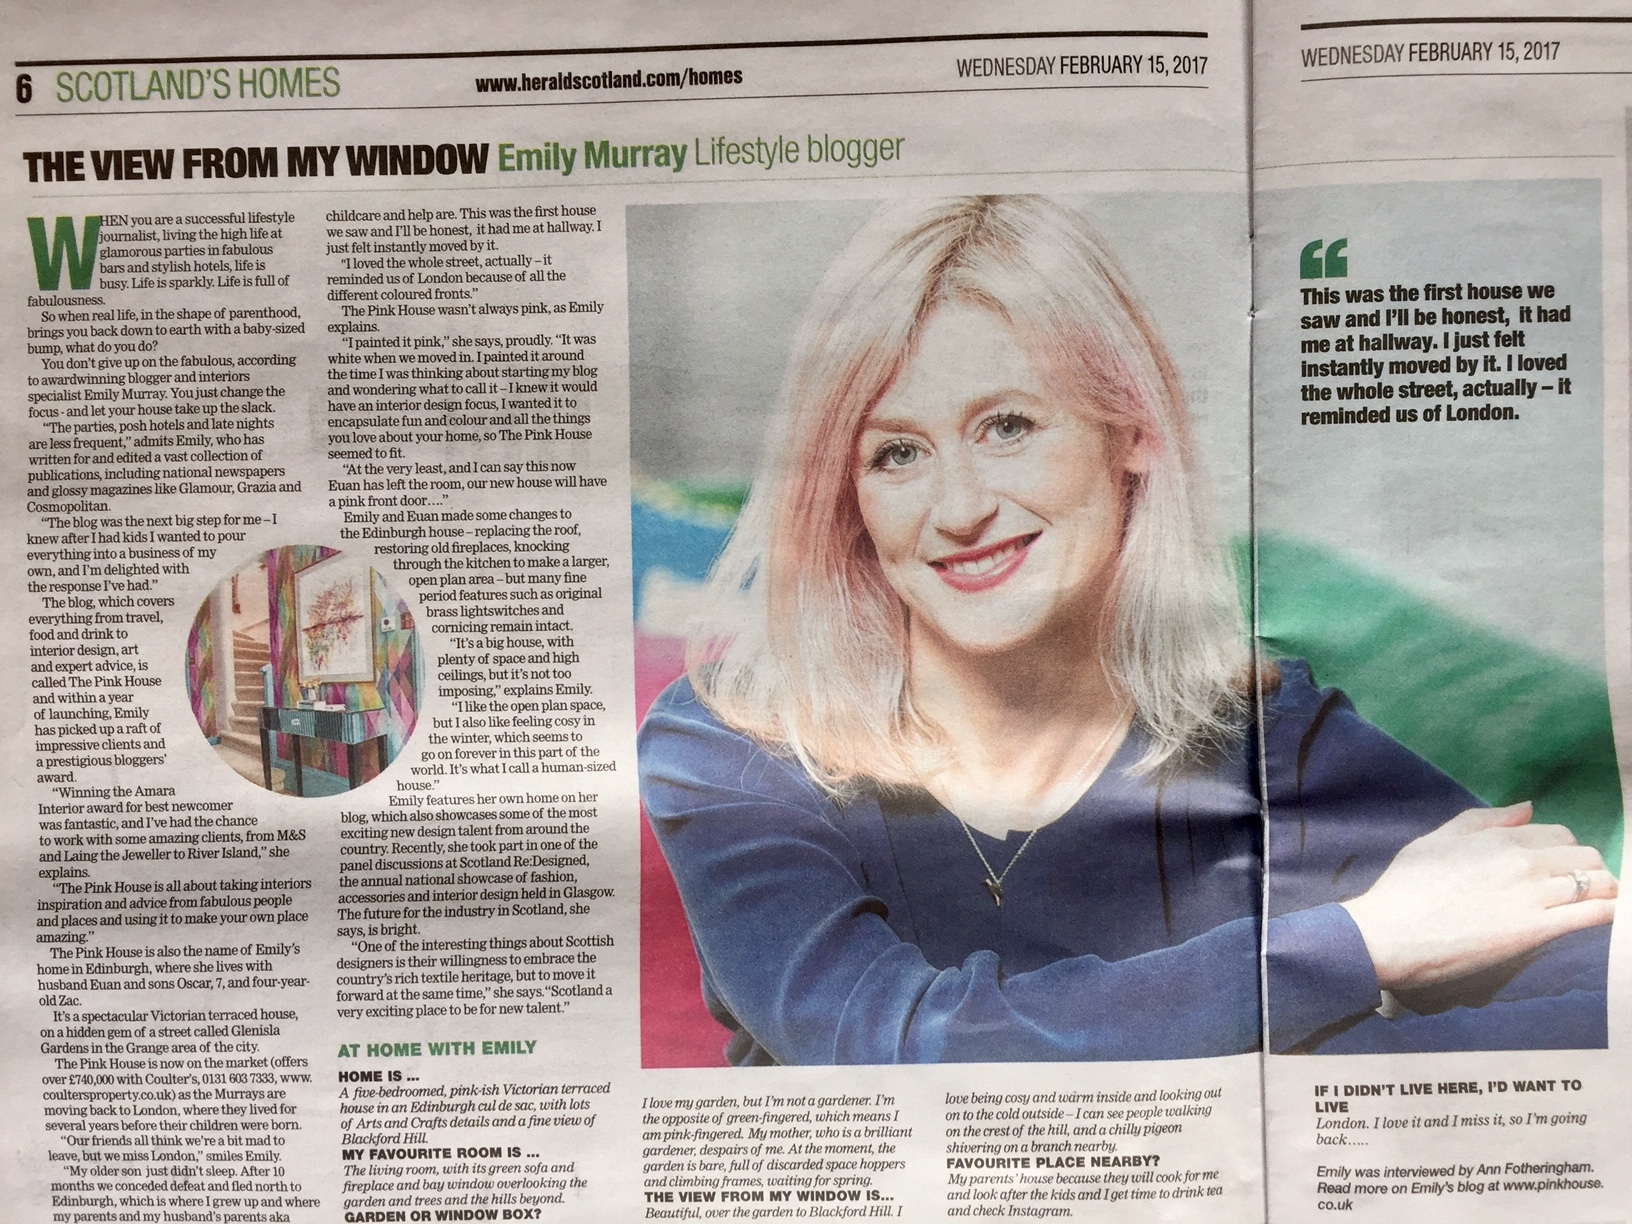 Emily Murray from The Pink House in The View From My Window in The Herald Scotland